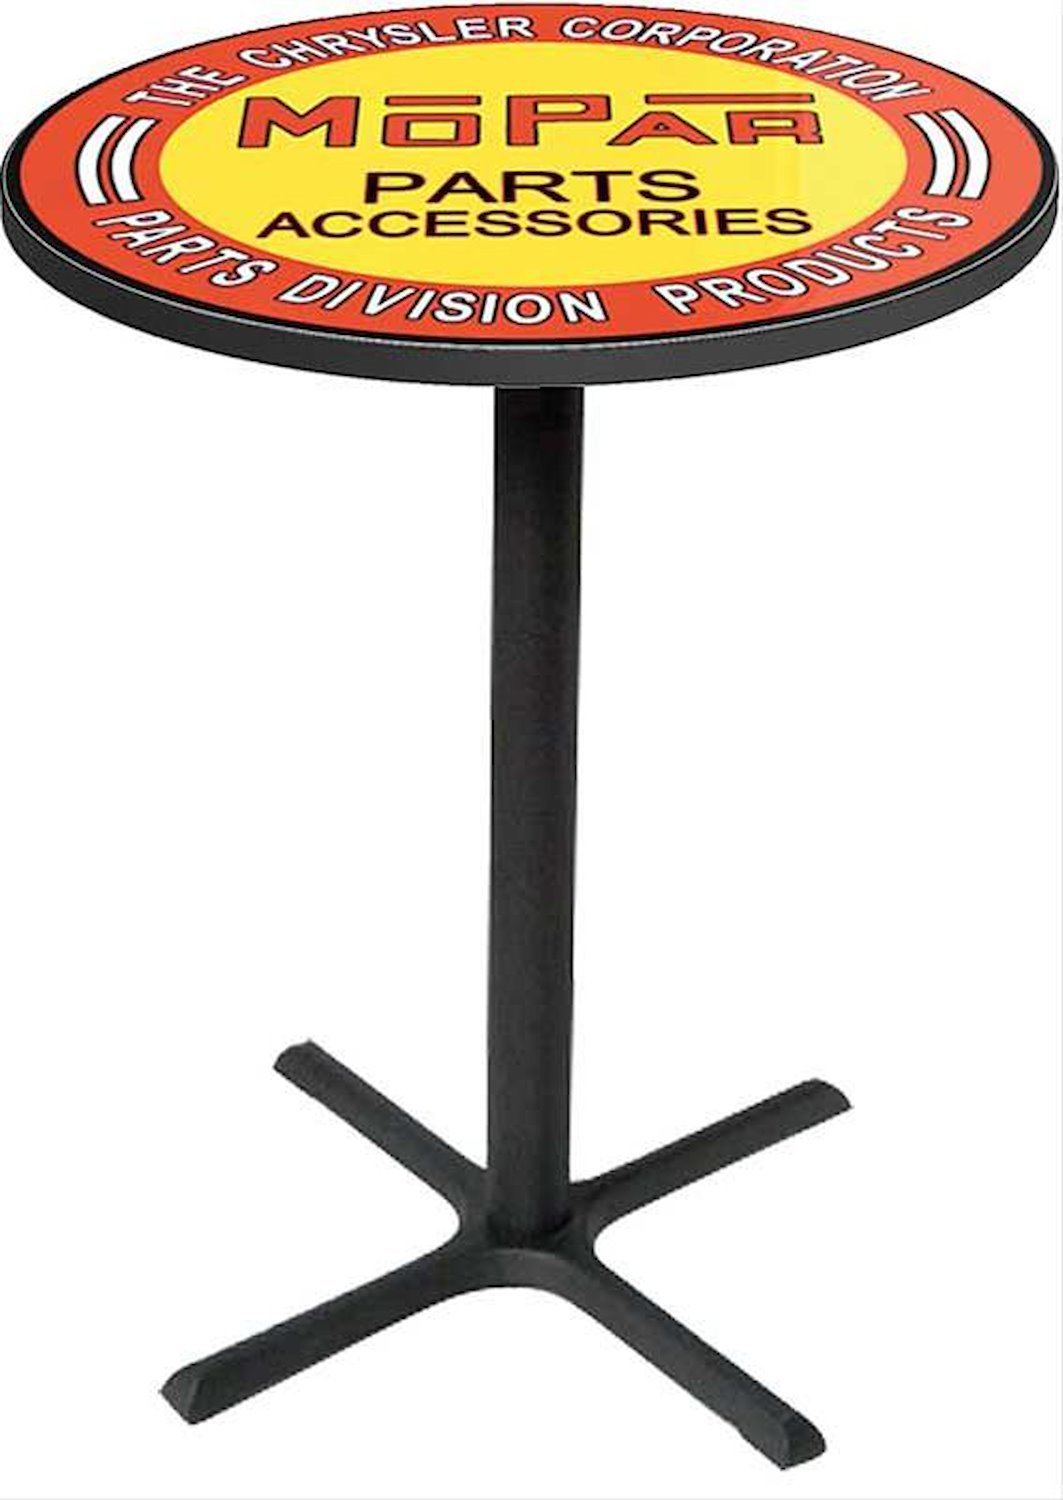 MD671106 Pub Table With Black Base 1948-53 Style Orange/Yellow Mopar parts And Accessories Logo